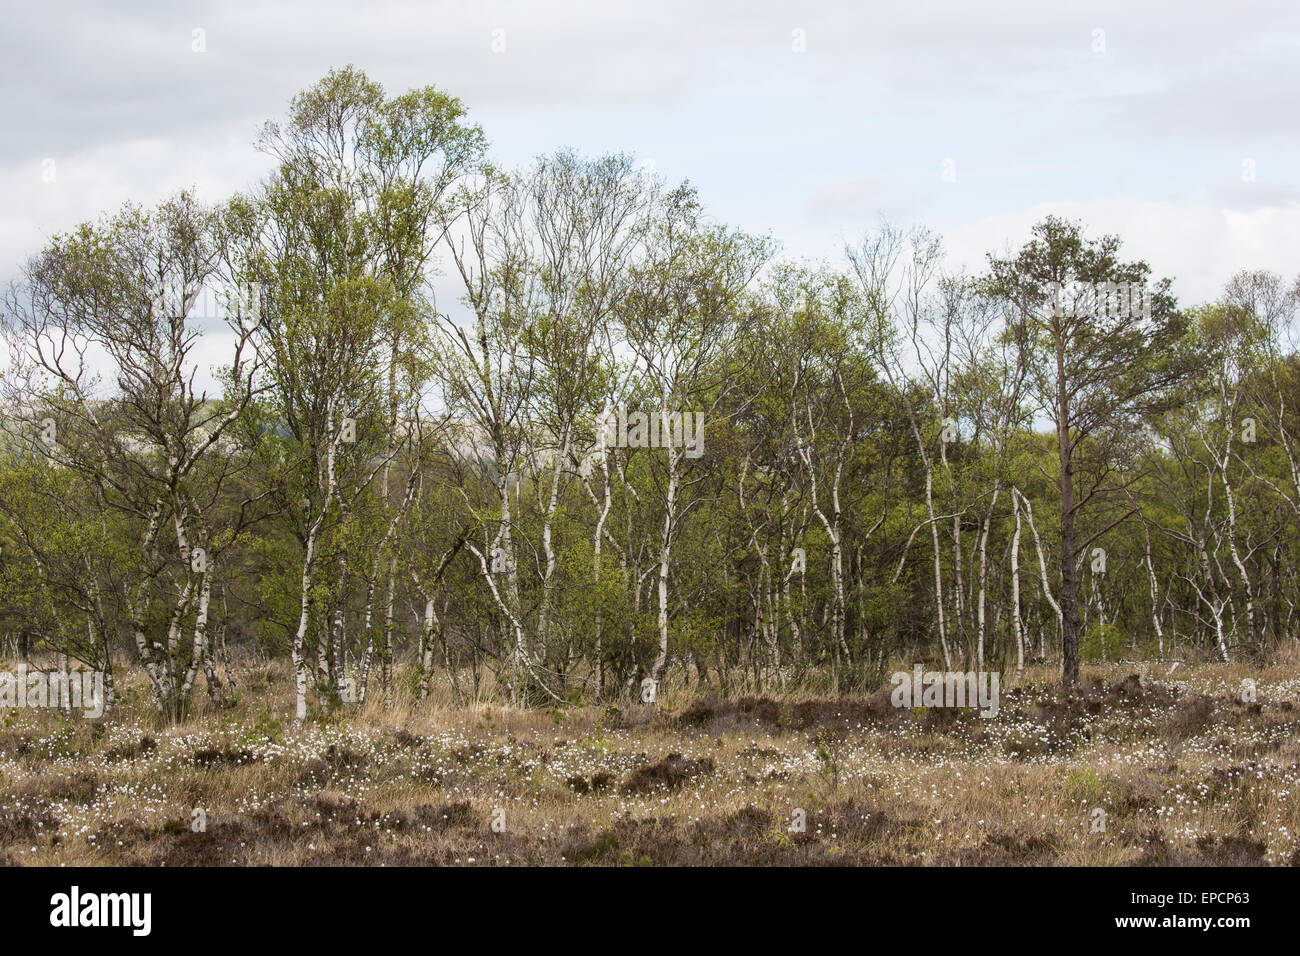 Meathorp Moss Nature Reserve, Cumbria, an example of a raised bog. Stock Photo